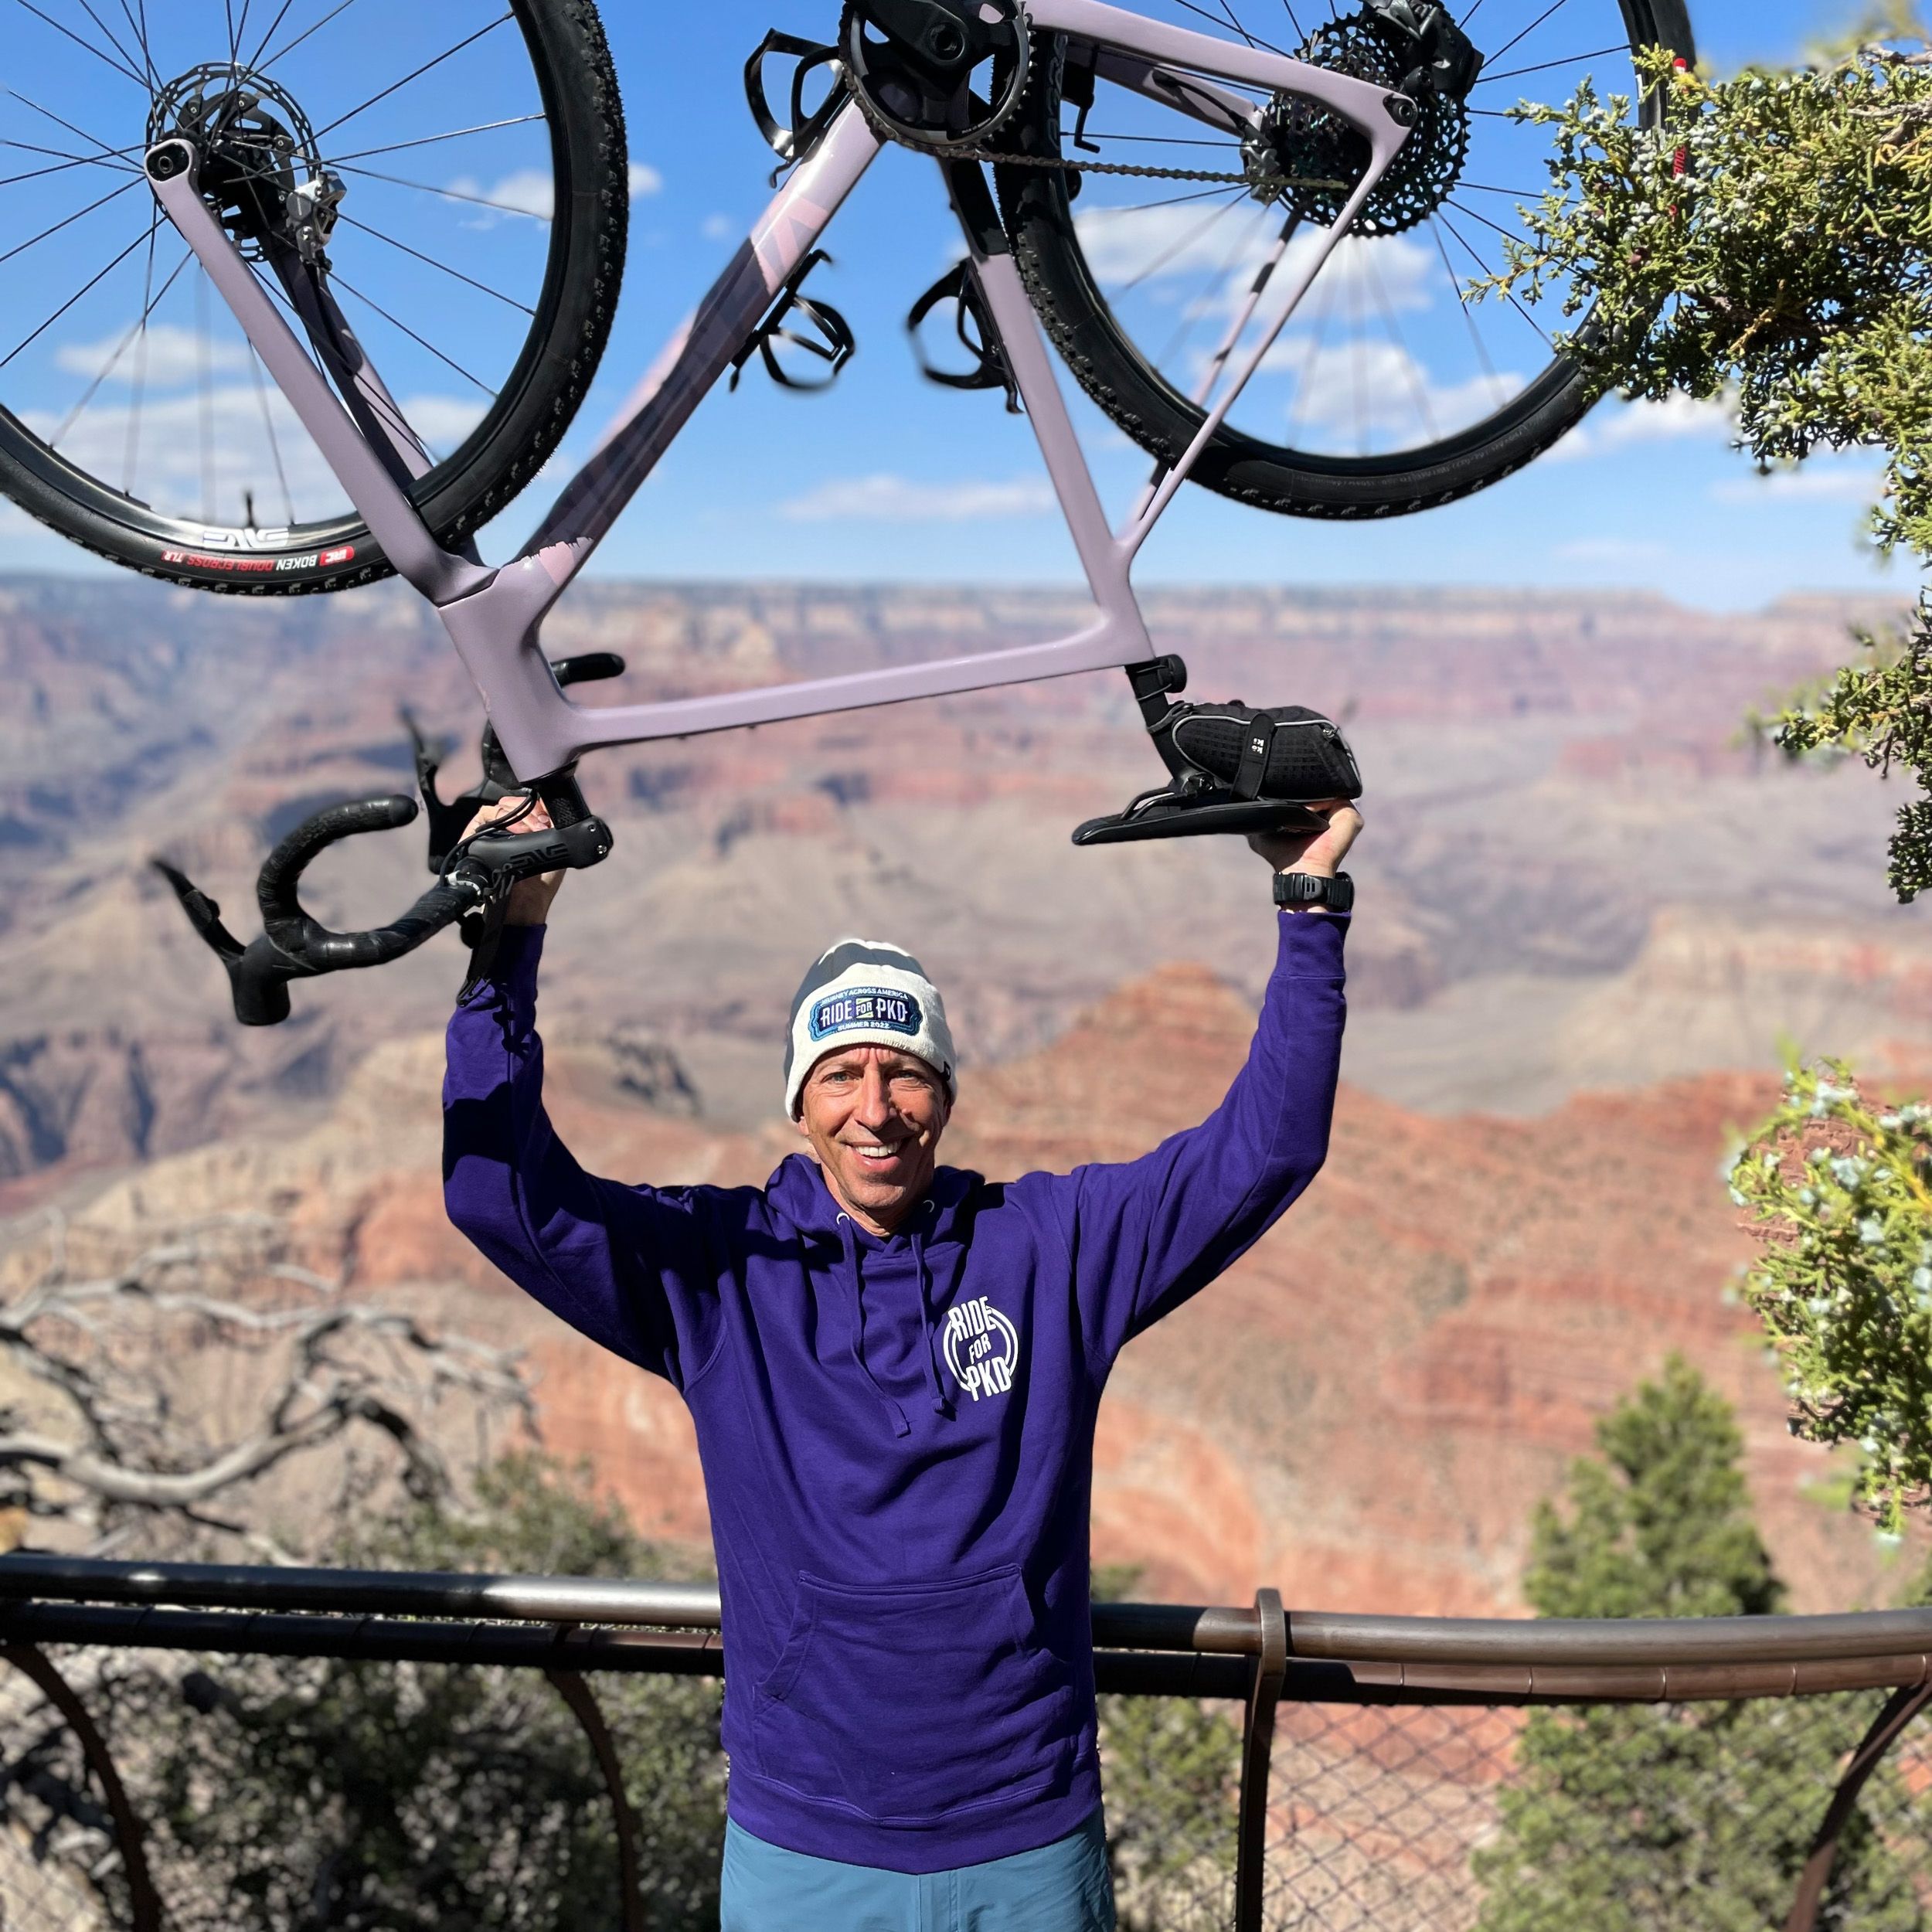 Cycling the Americas – Page 3 – CyclingAgain